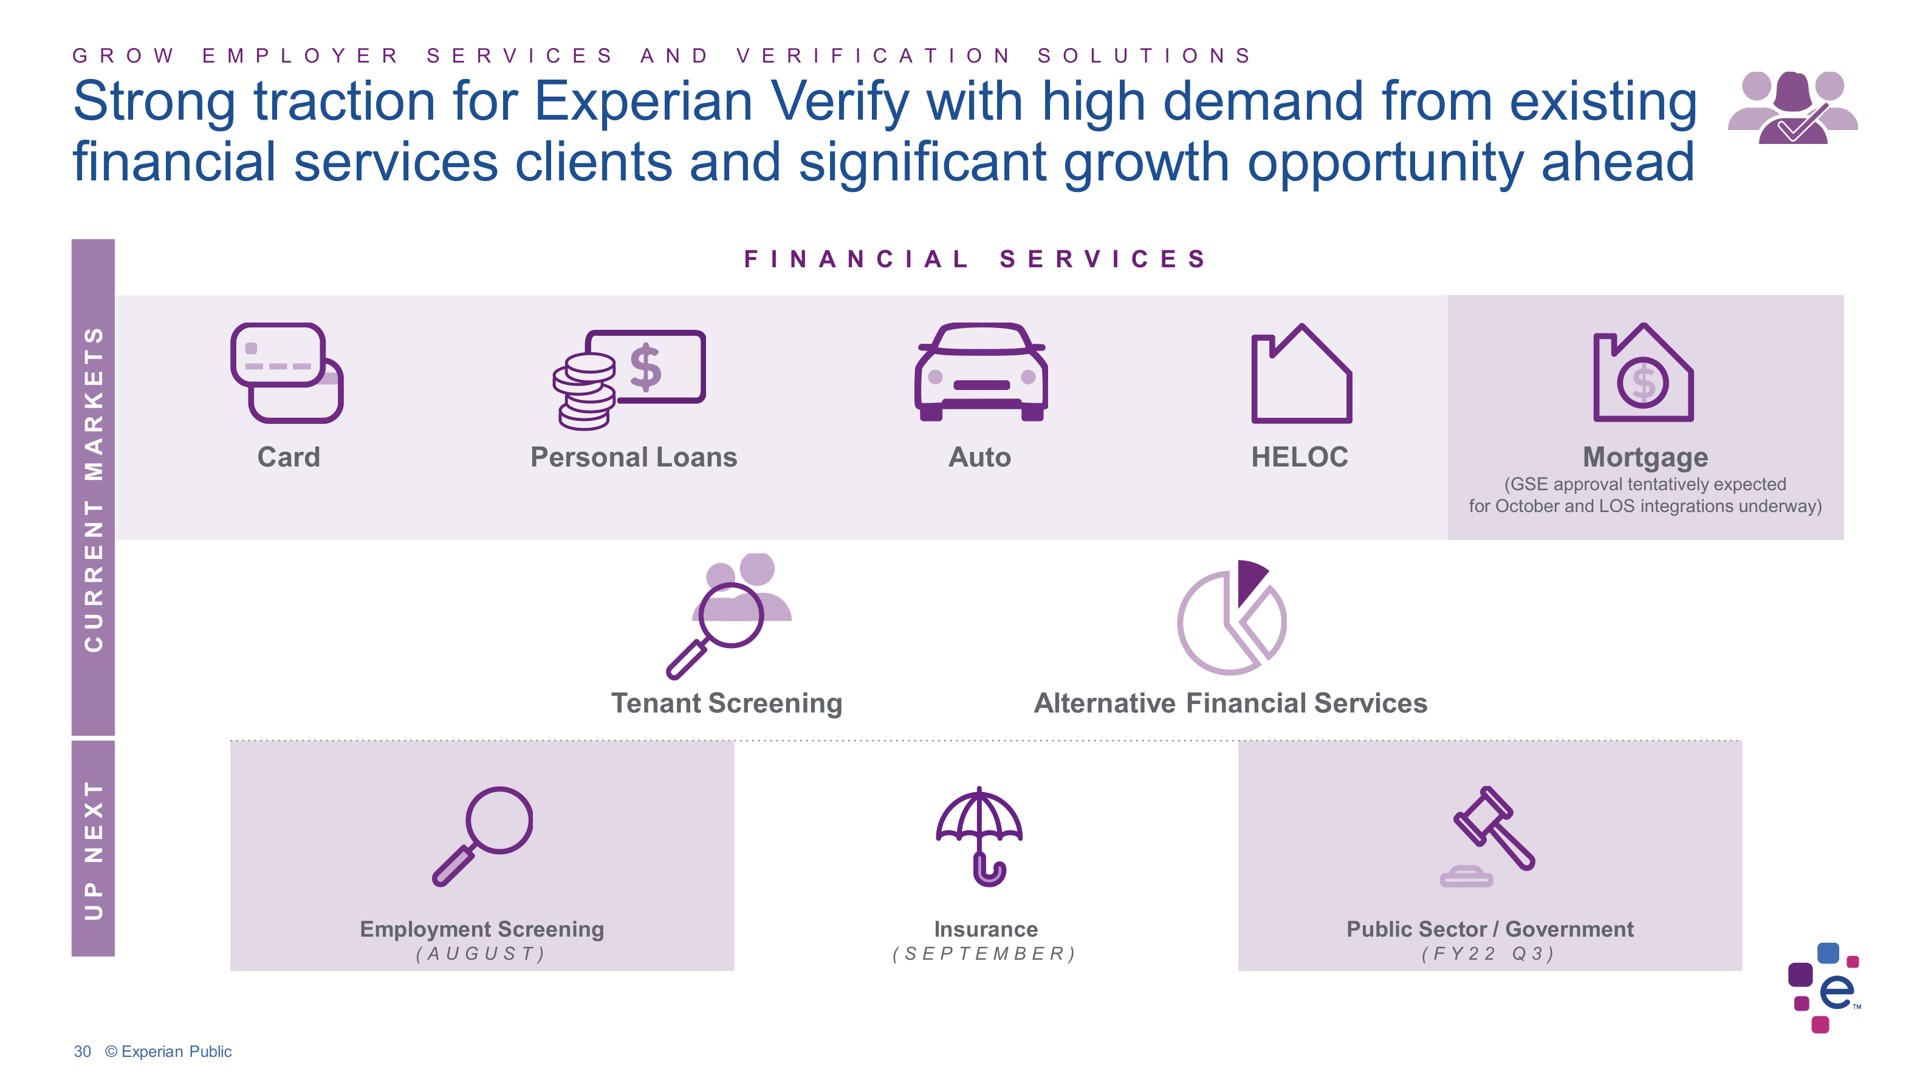 strong traction for verify with high demand from existing financial services clients and significant growth opportunity ahead | Experian